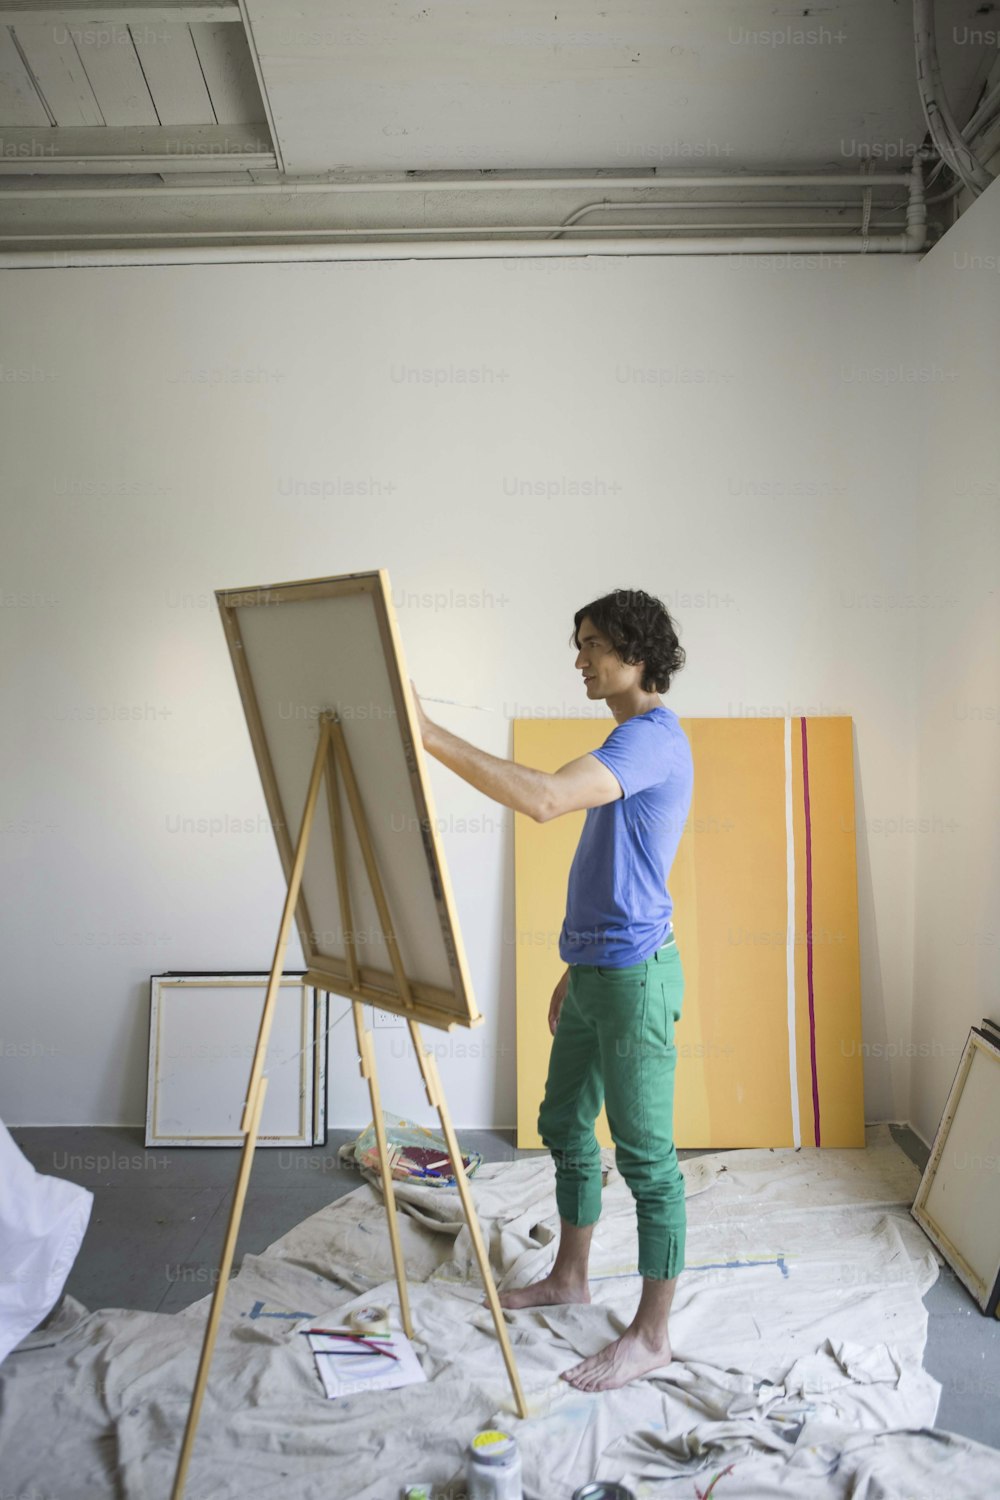 a man standing next to a easel in a room